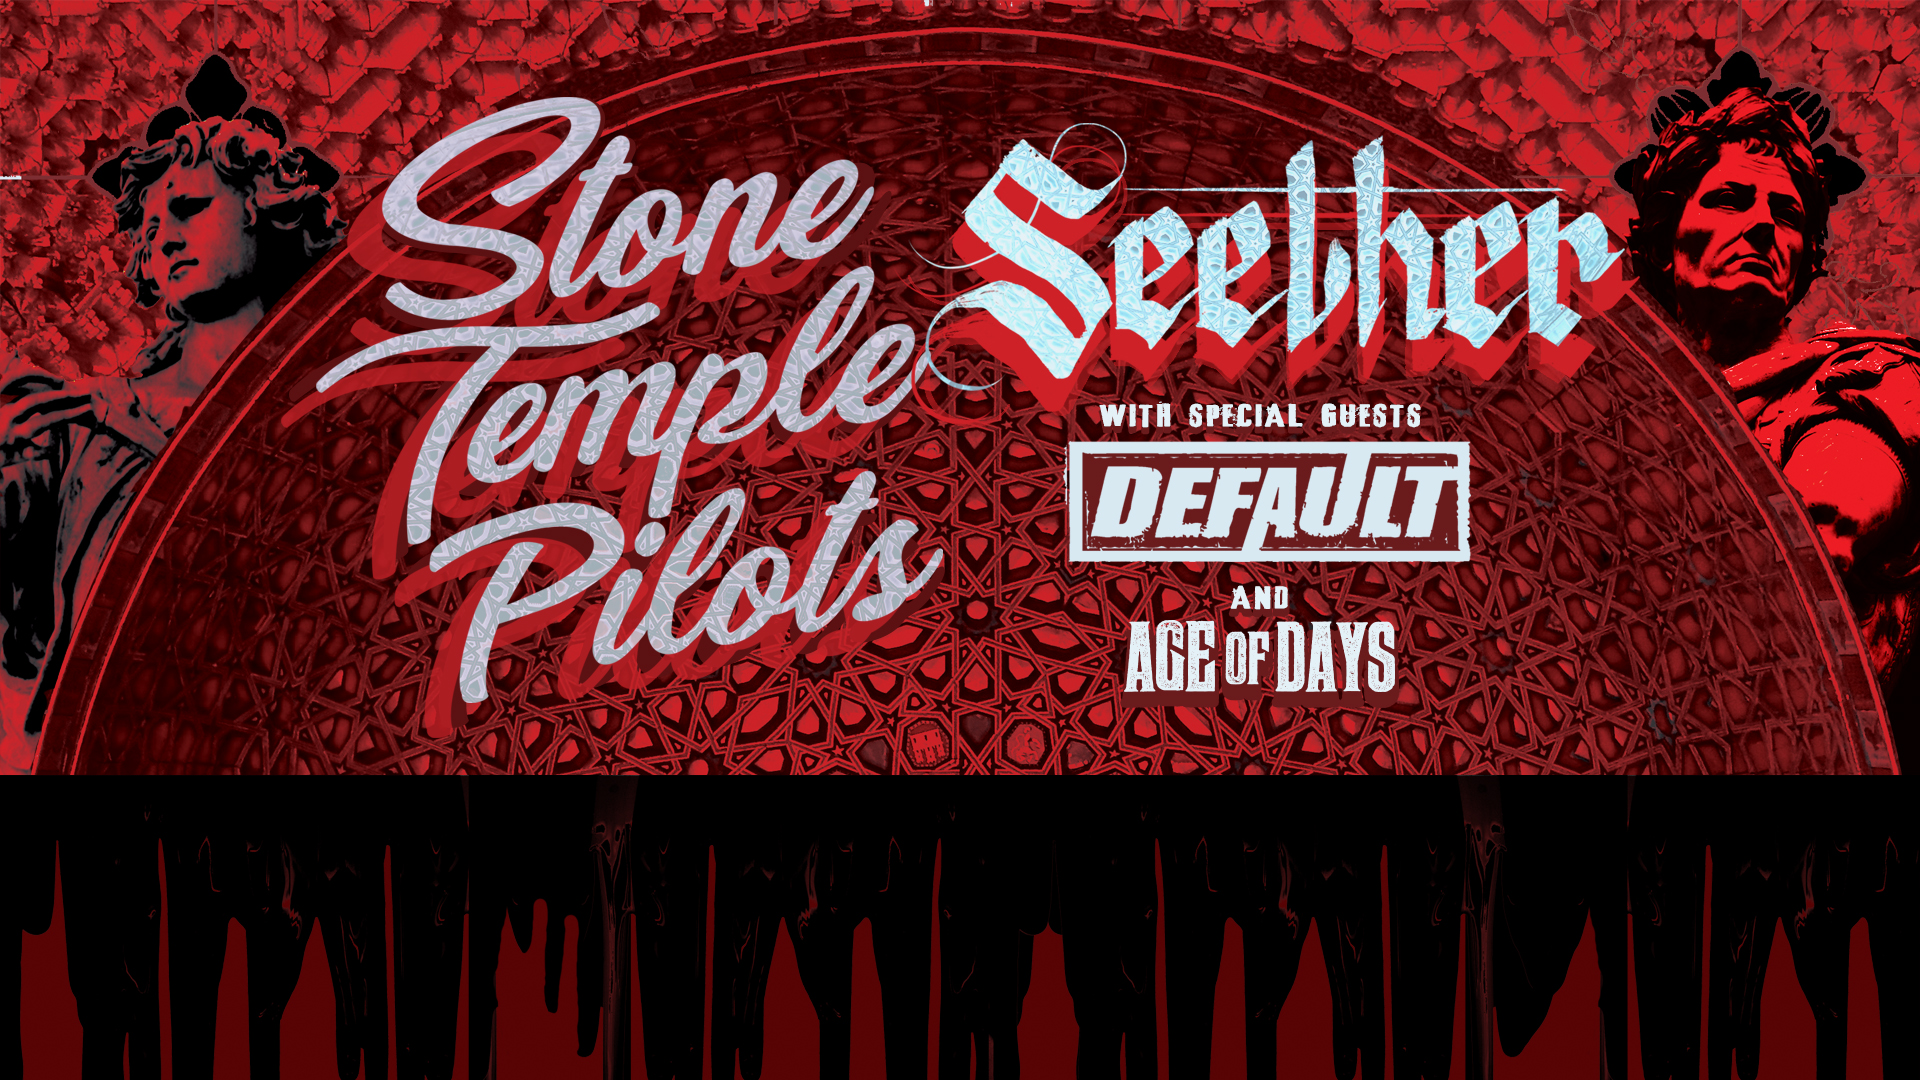 Stone Temple Pilots and Seether with special guests Default and Age of Days, Oct 23 at the South Okanagan Events Centre